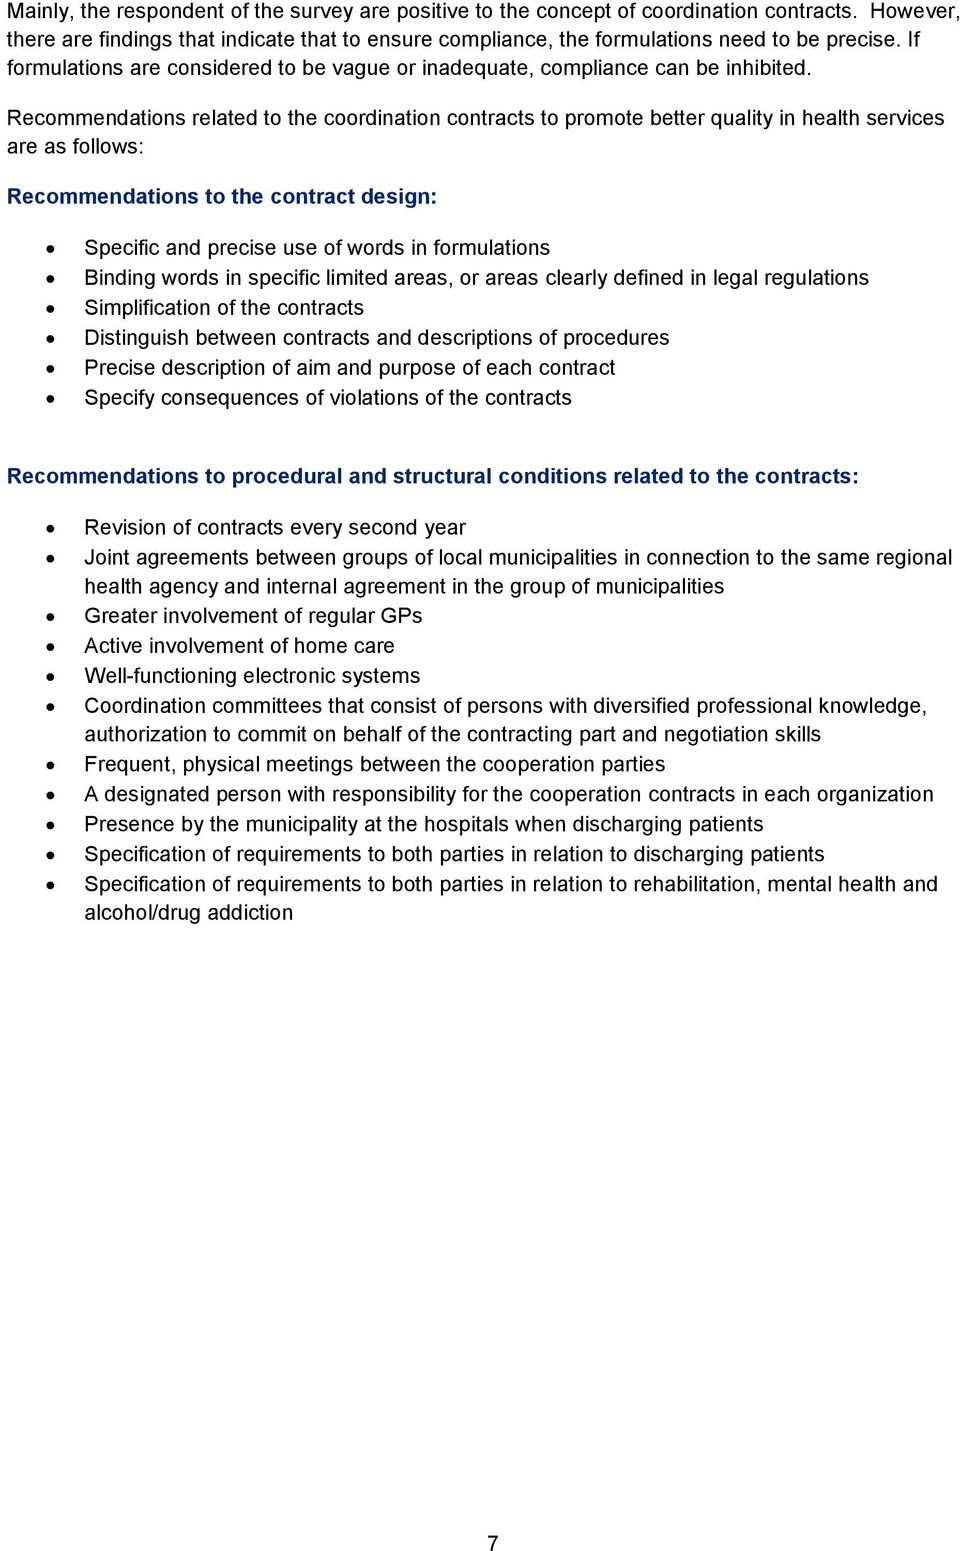 Recommendations related to the coordination contracts to promote better quality in health services are as follows: Recommendations to the contract design: Specific and precise use of words in